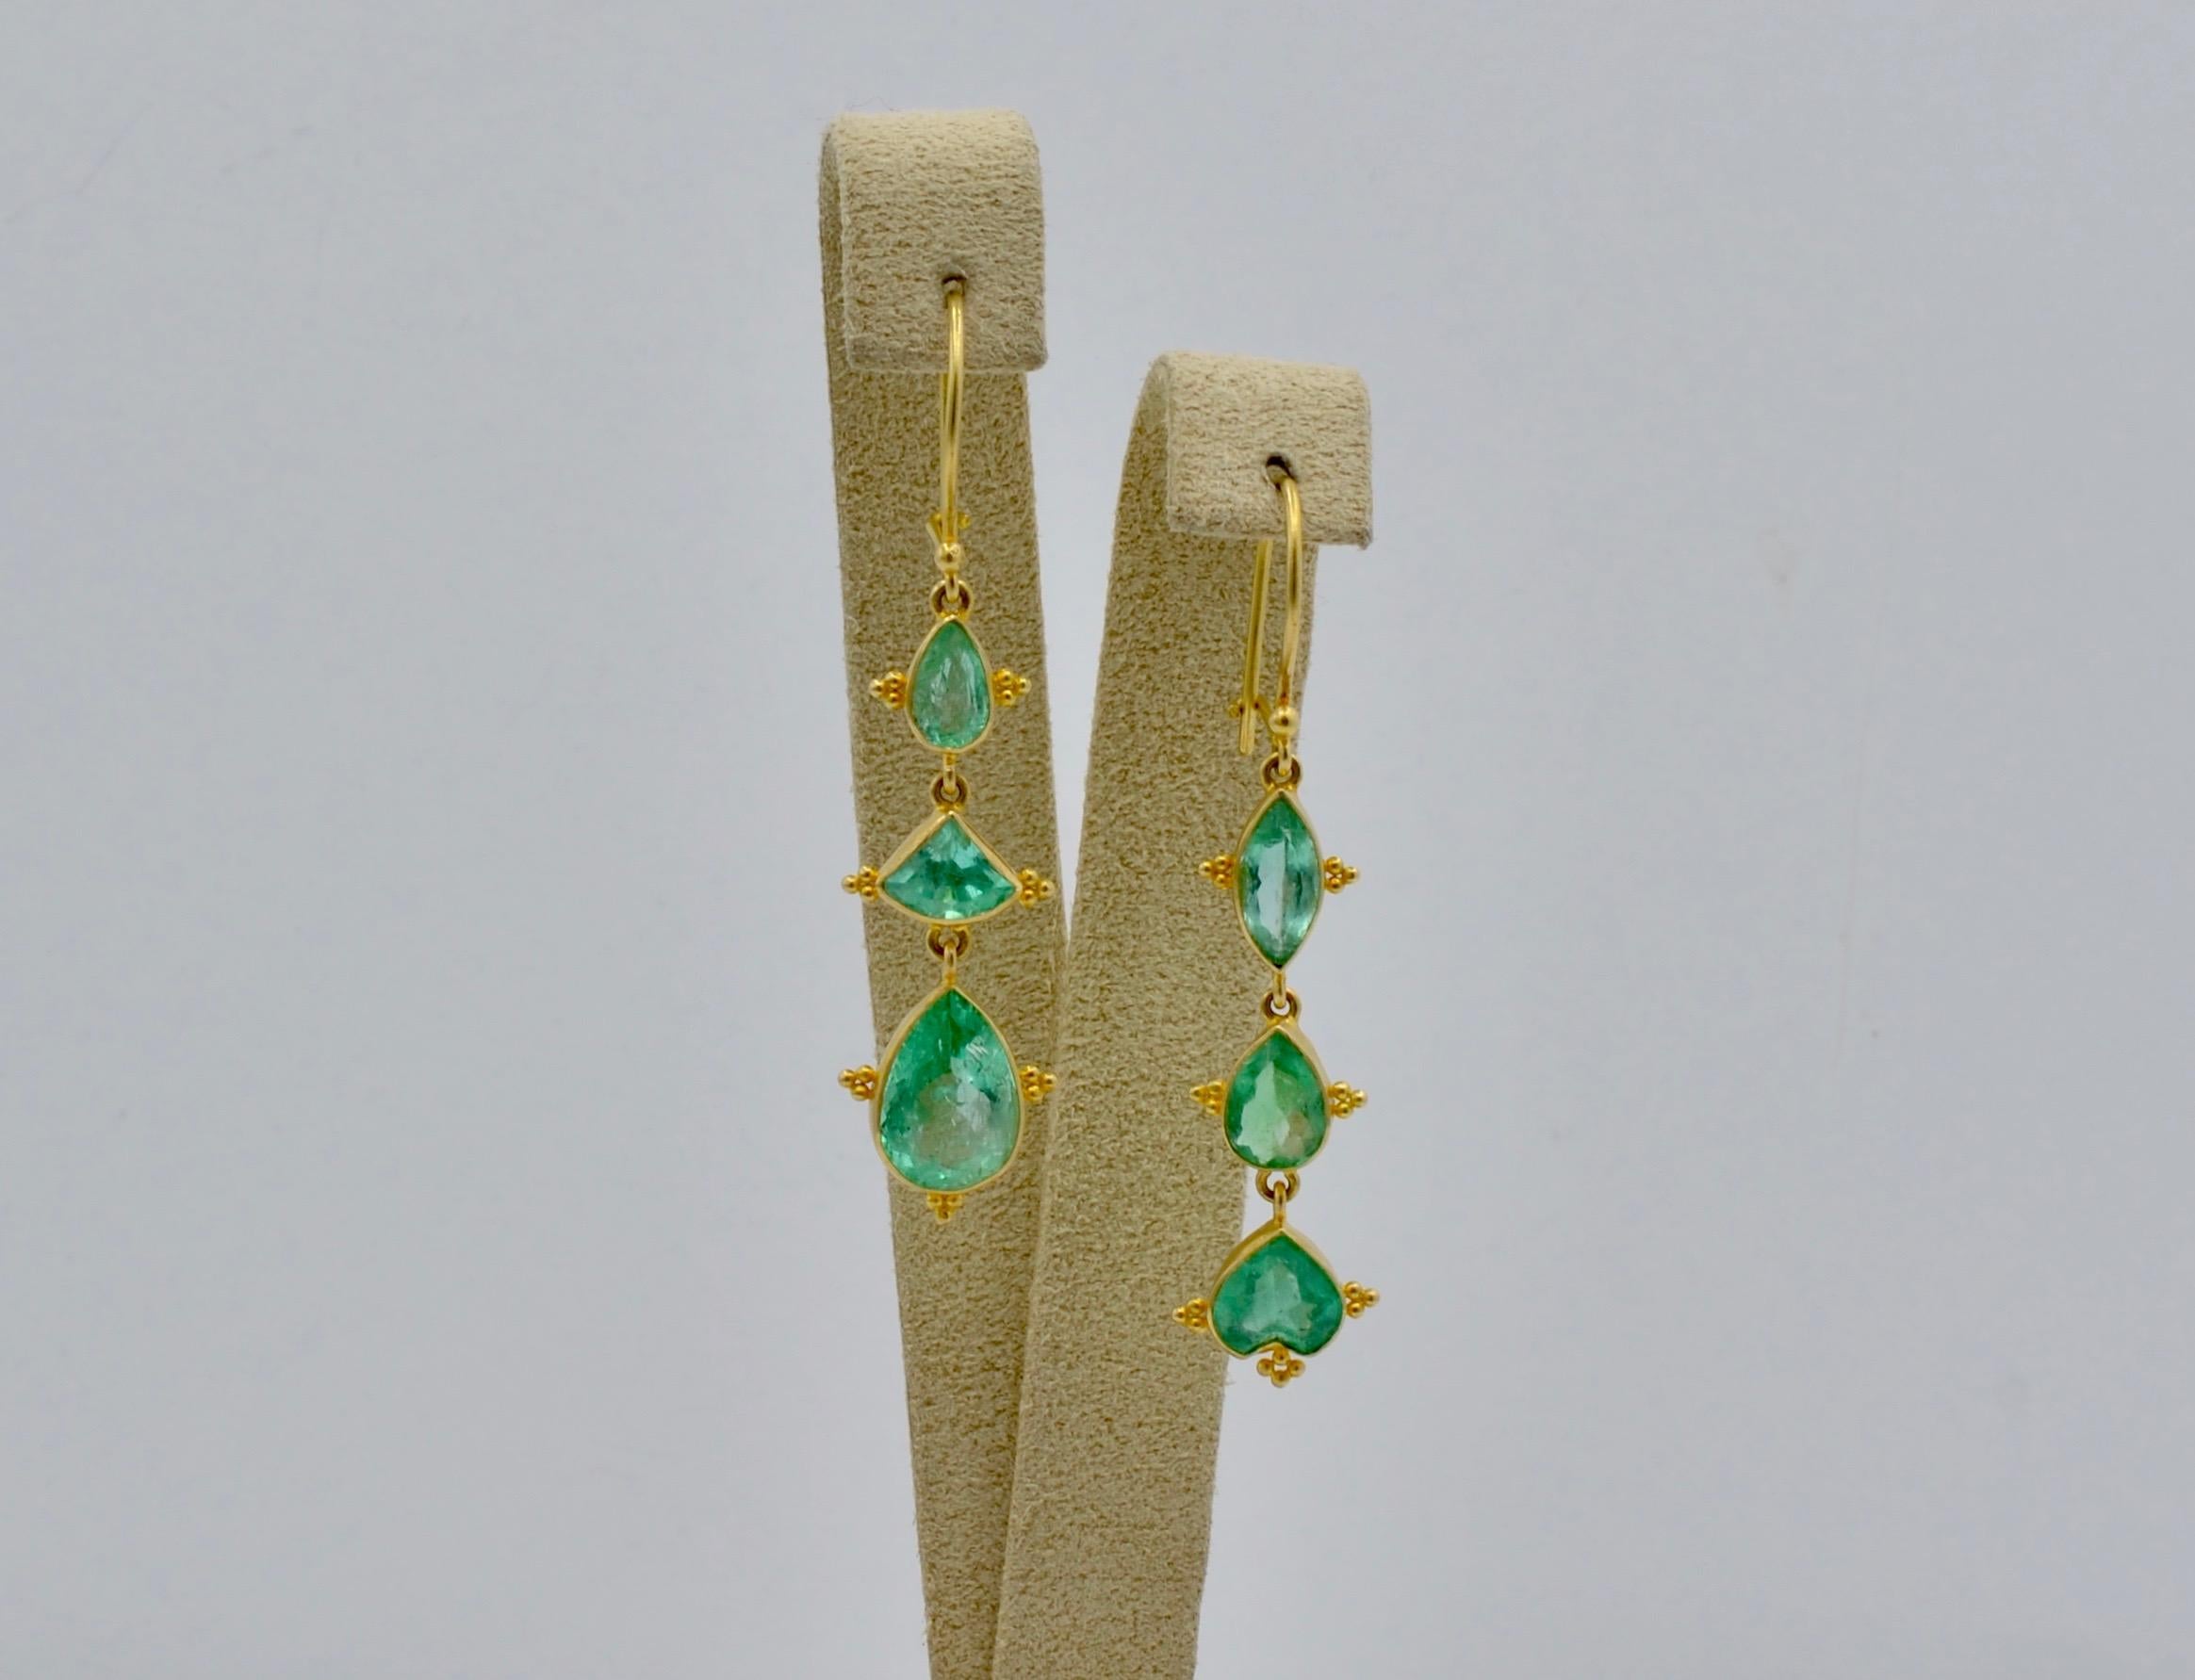 Marquise Cut Emerald Earrings in Marquise and Pear Shapes Set in 18 Karat Yellow Gold